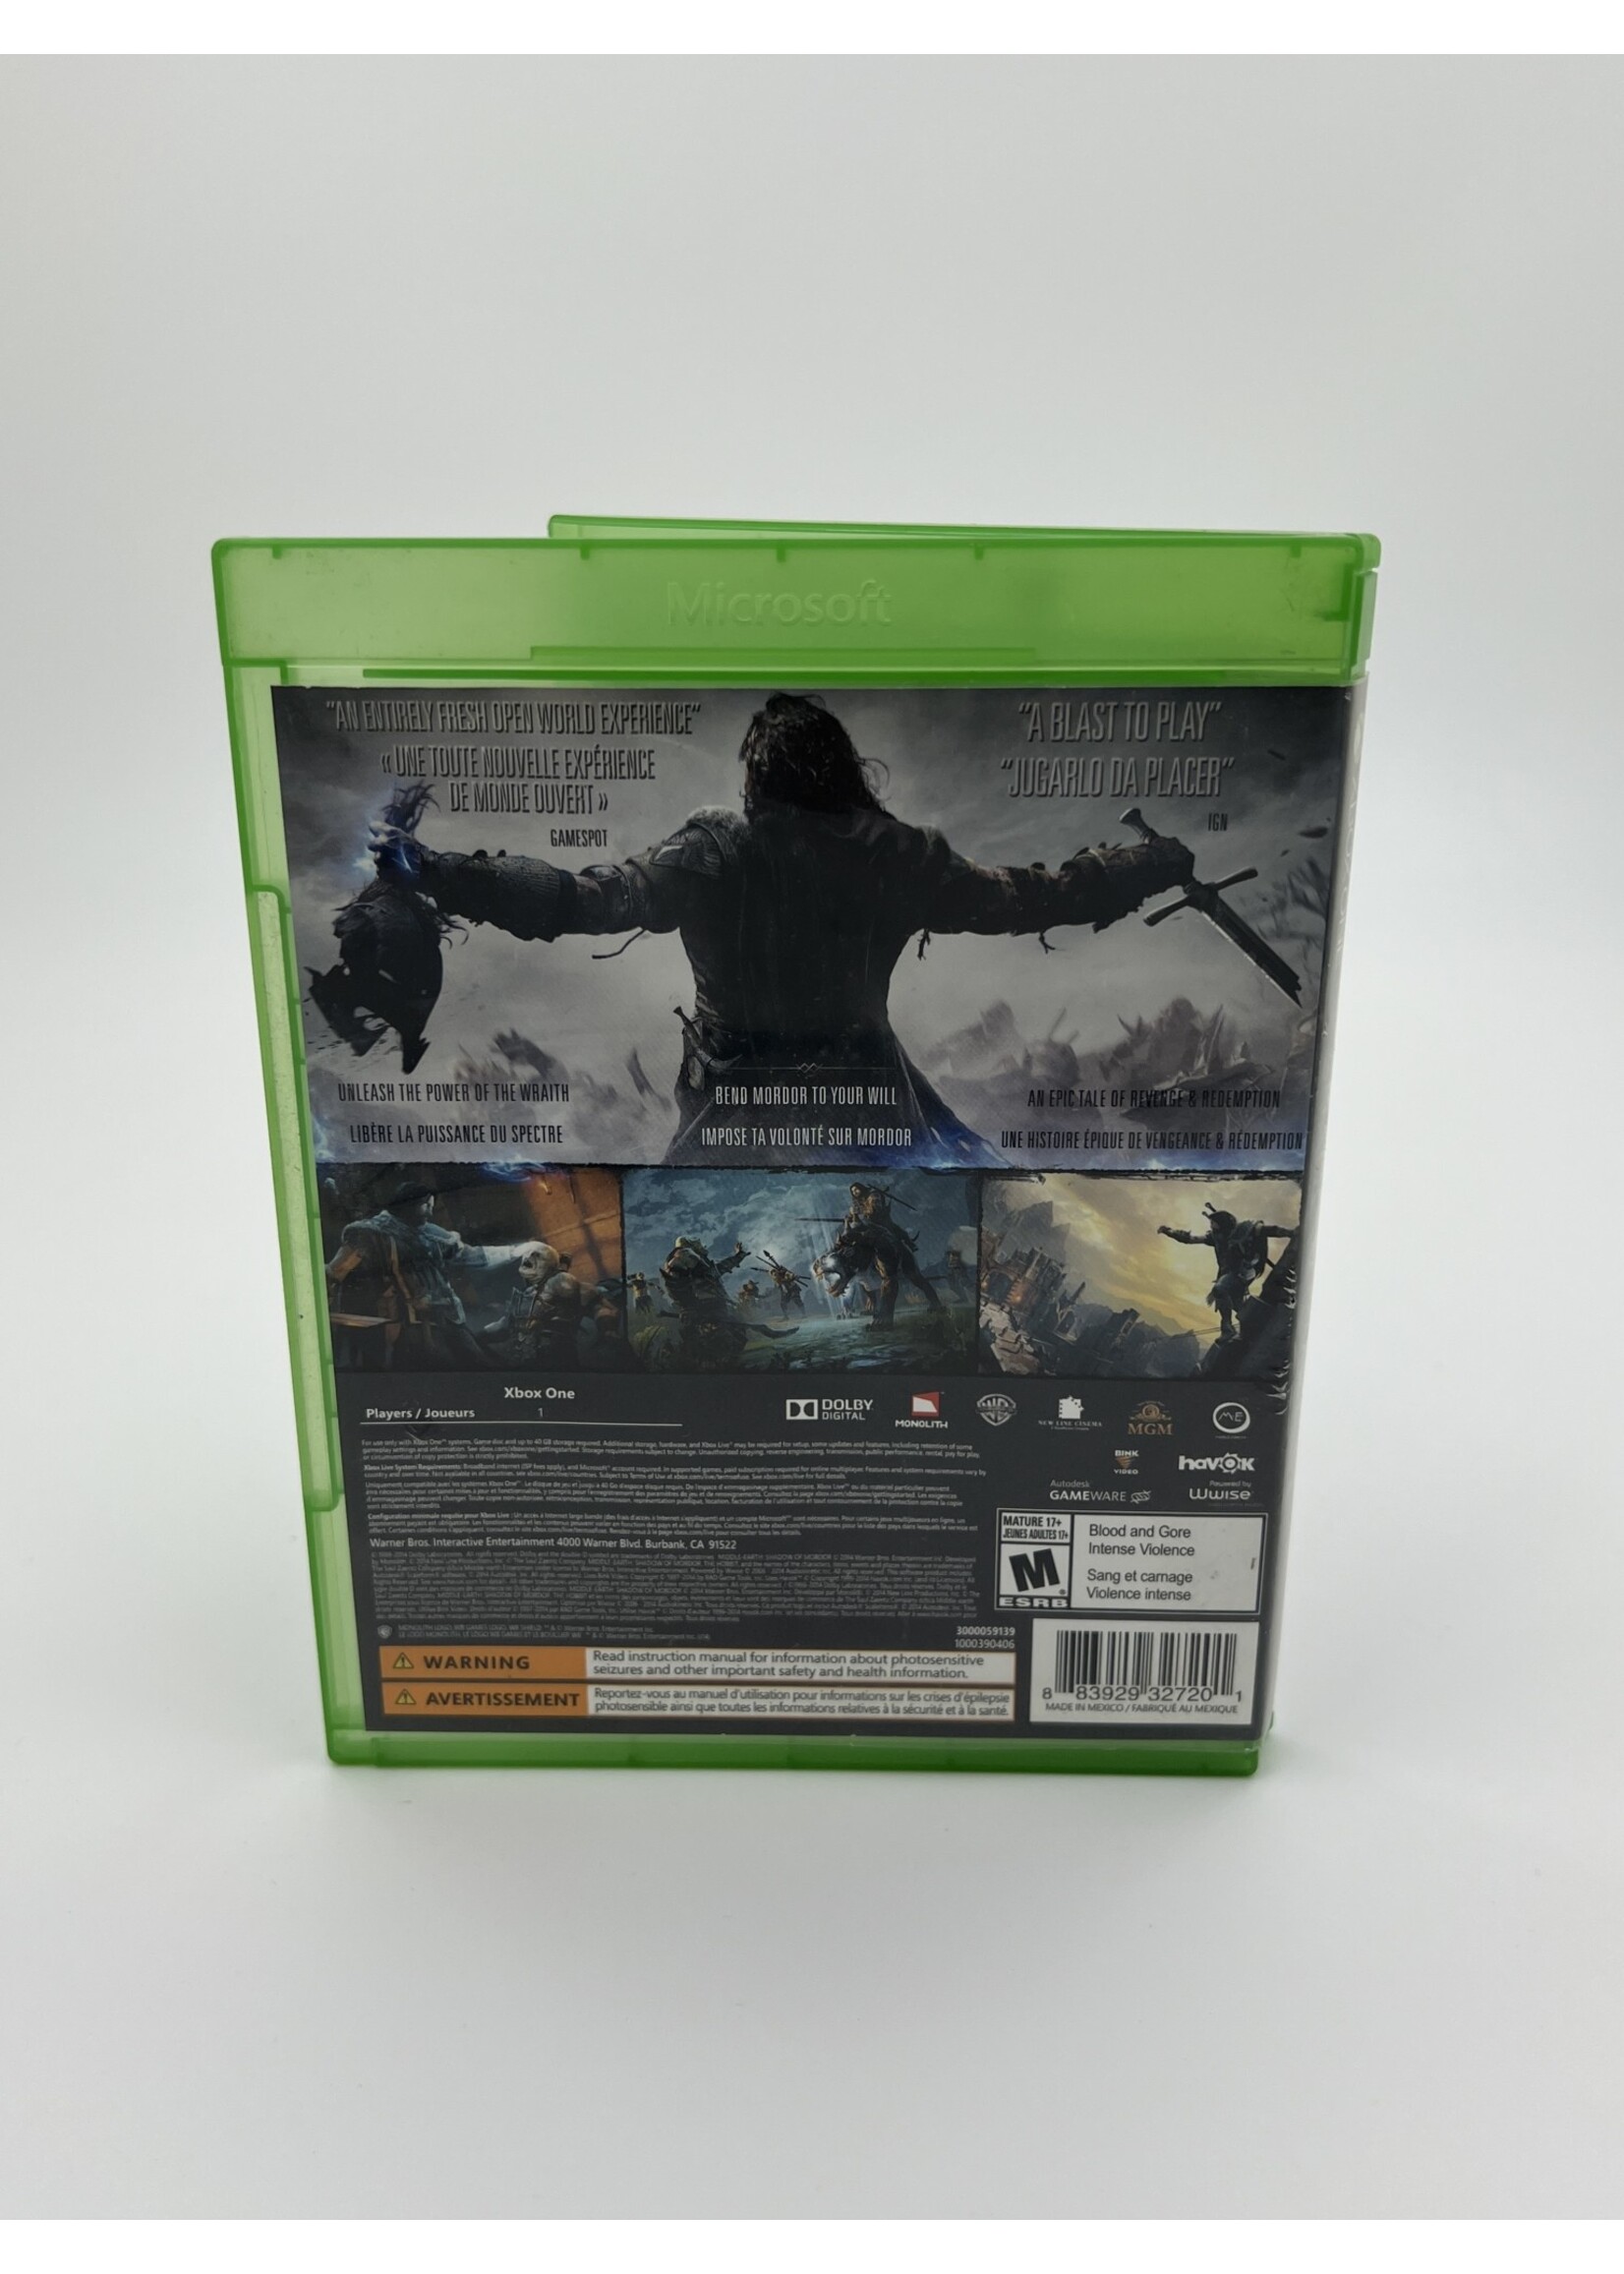 Xbox Middle Earth Shadow Of Mordor Xbox One